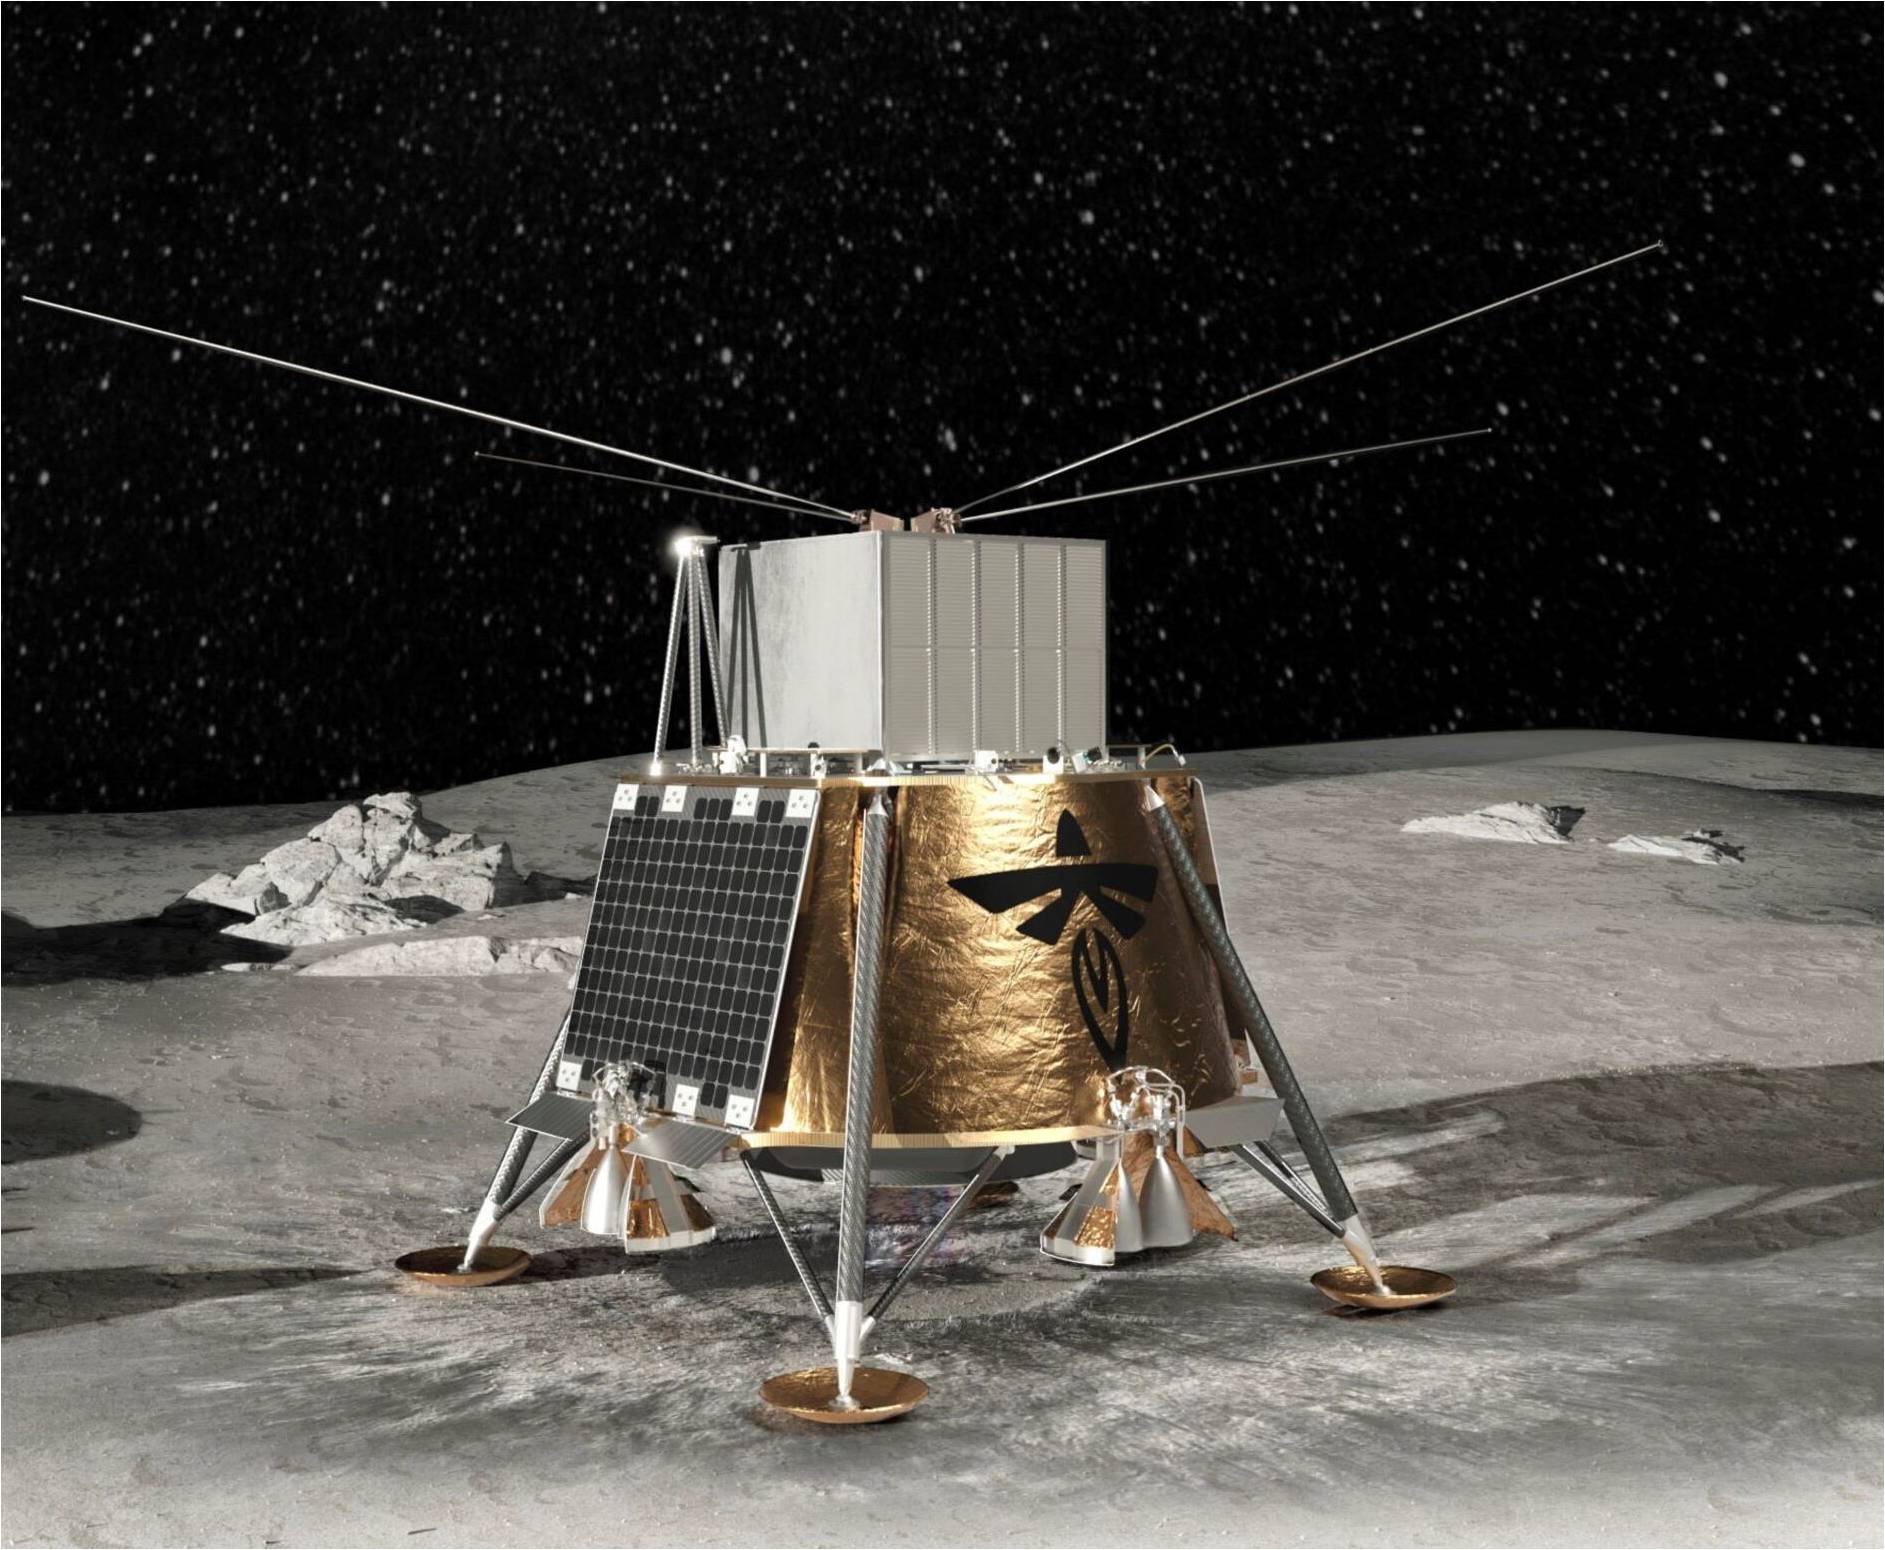 a roughly cube-shaped spacecraft wrapped in gold foil on the moon